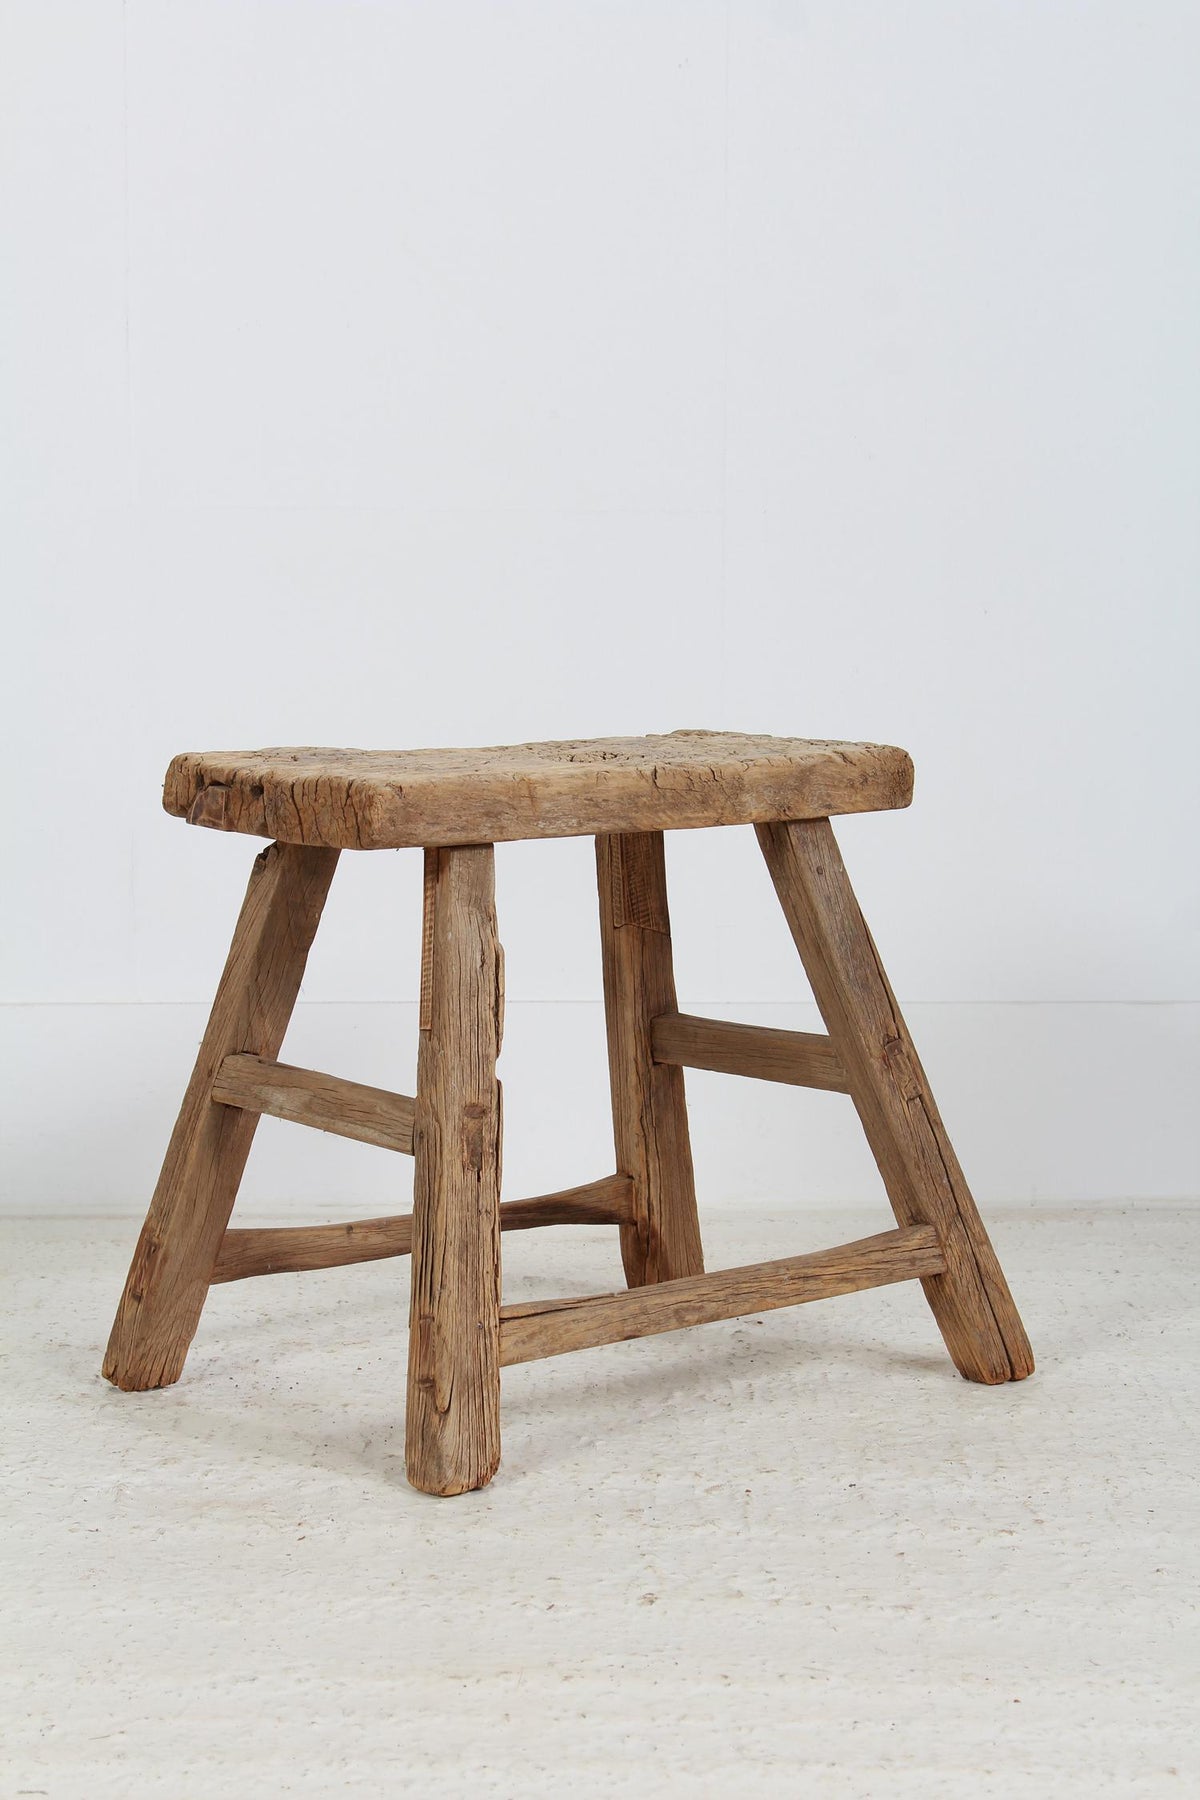 THREE RUSTIC CHINESE WORKERS STOOLS or Tables